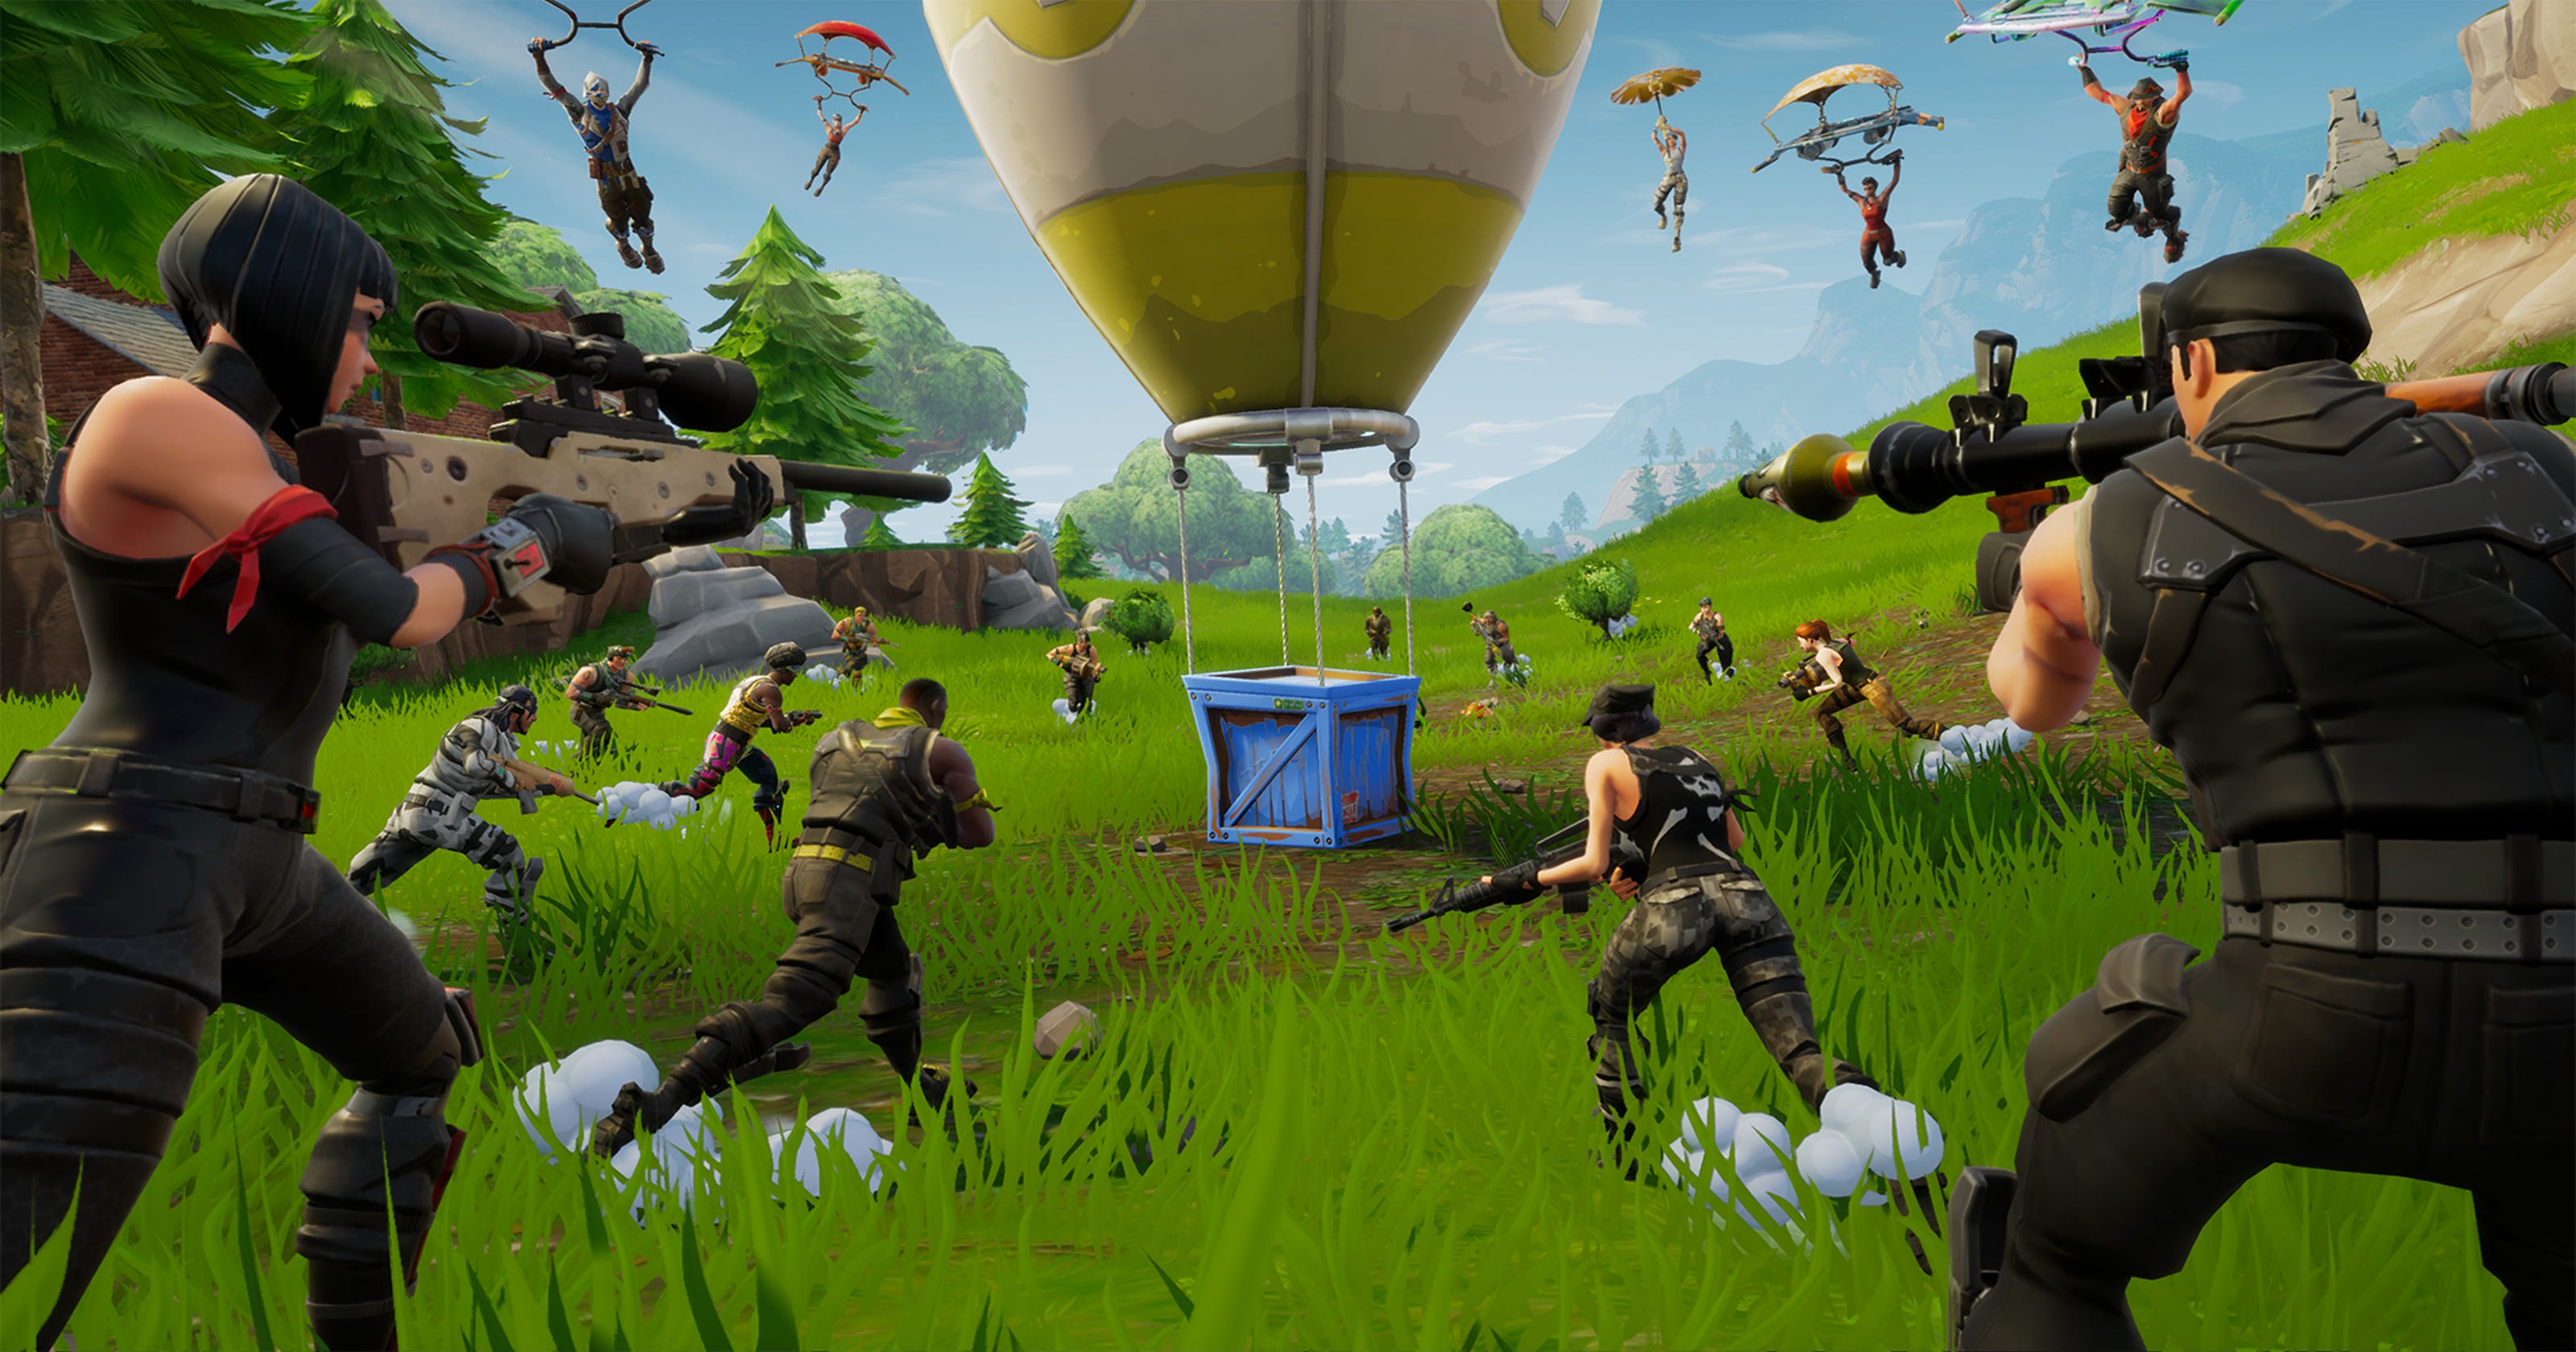 has fortnite peaked as season 8 arrives research suggests revenue dipped in january - next starter pack in fortnite season 8